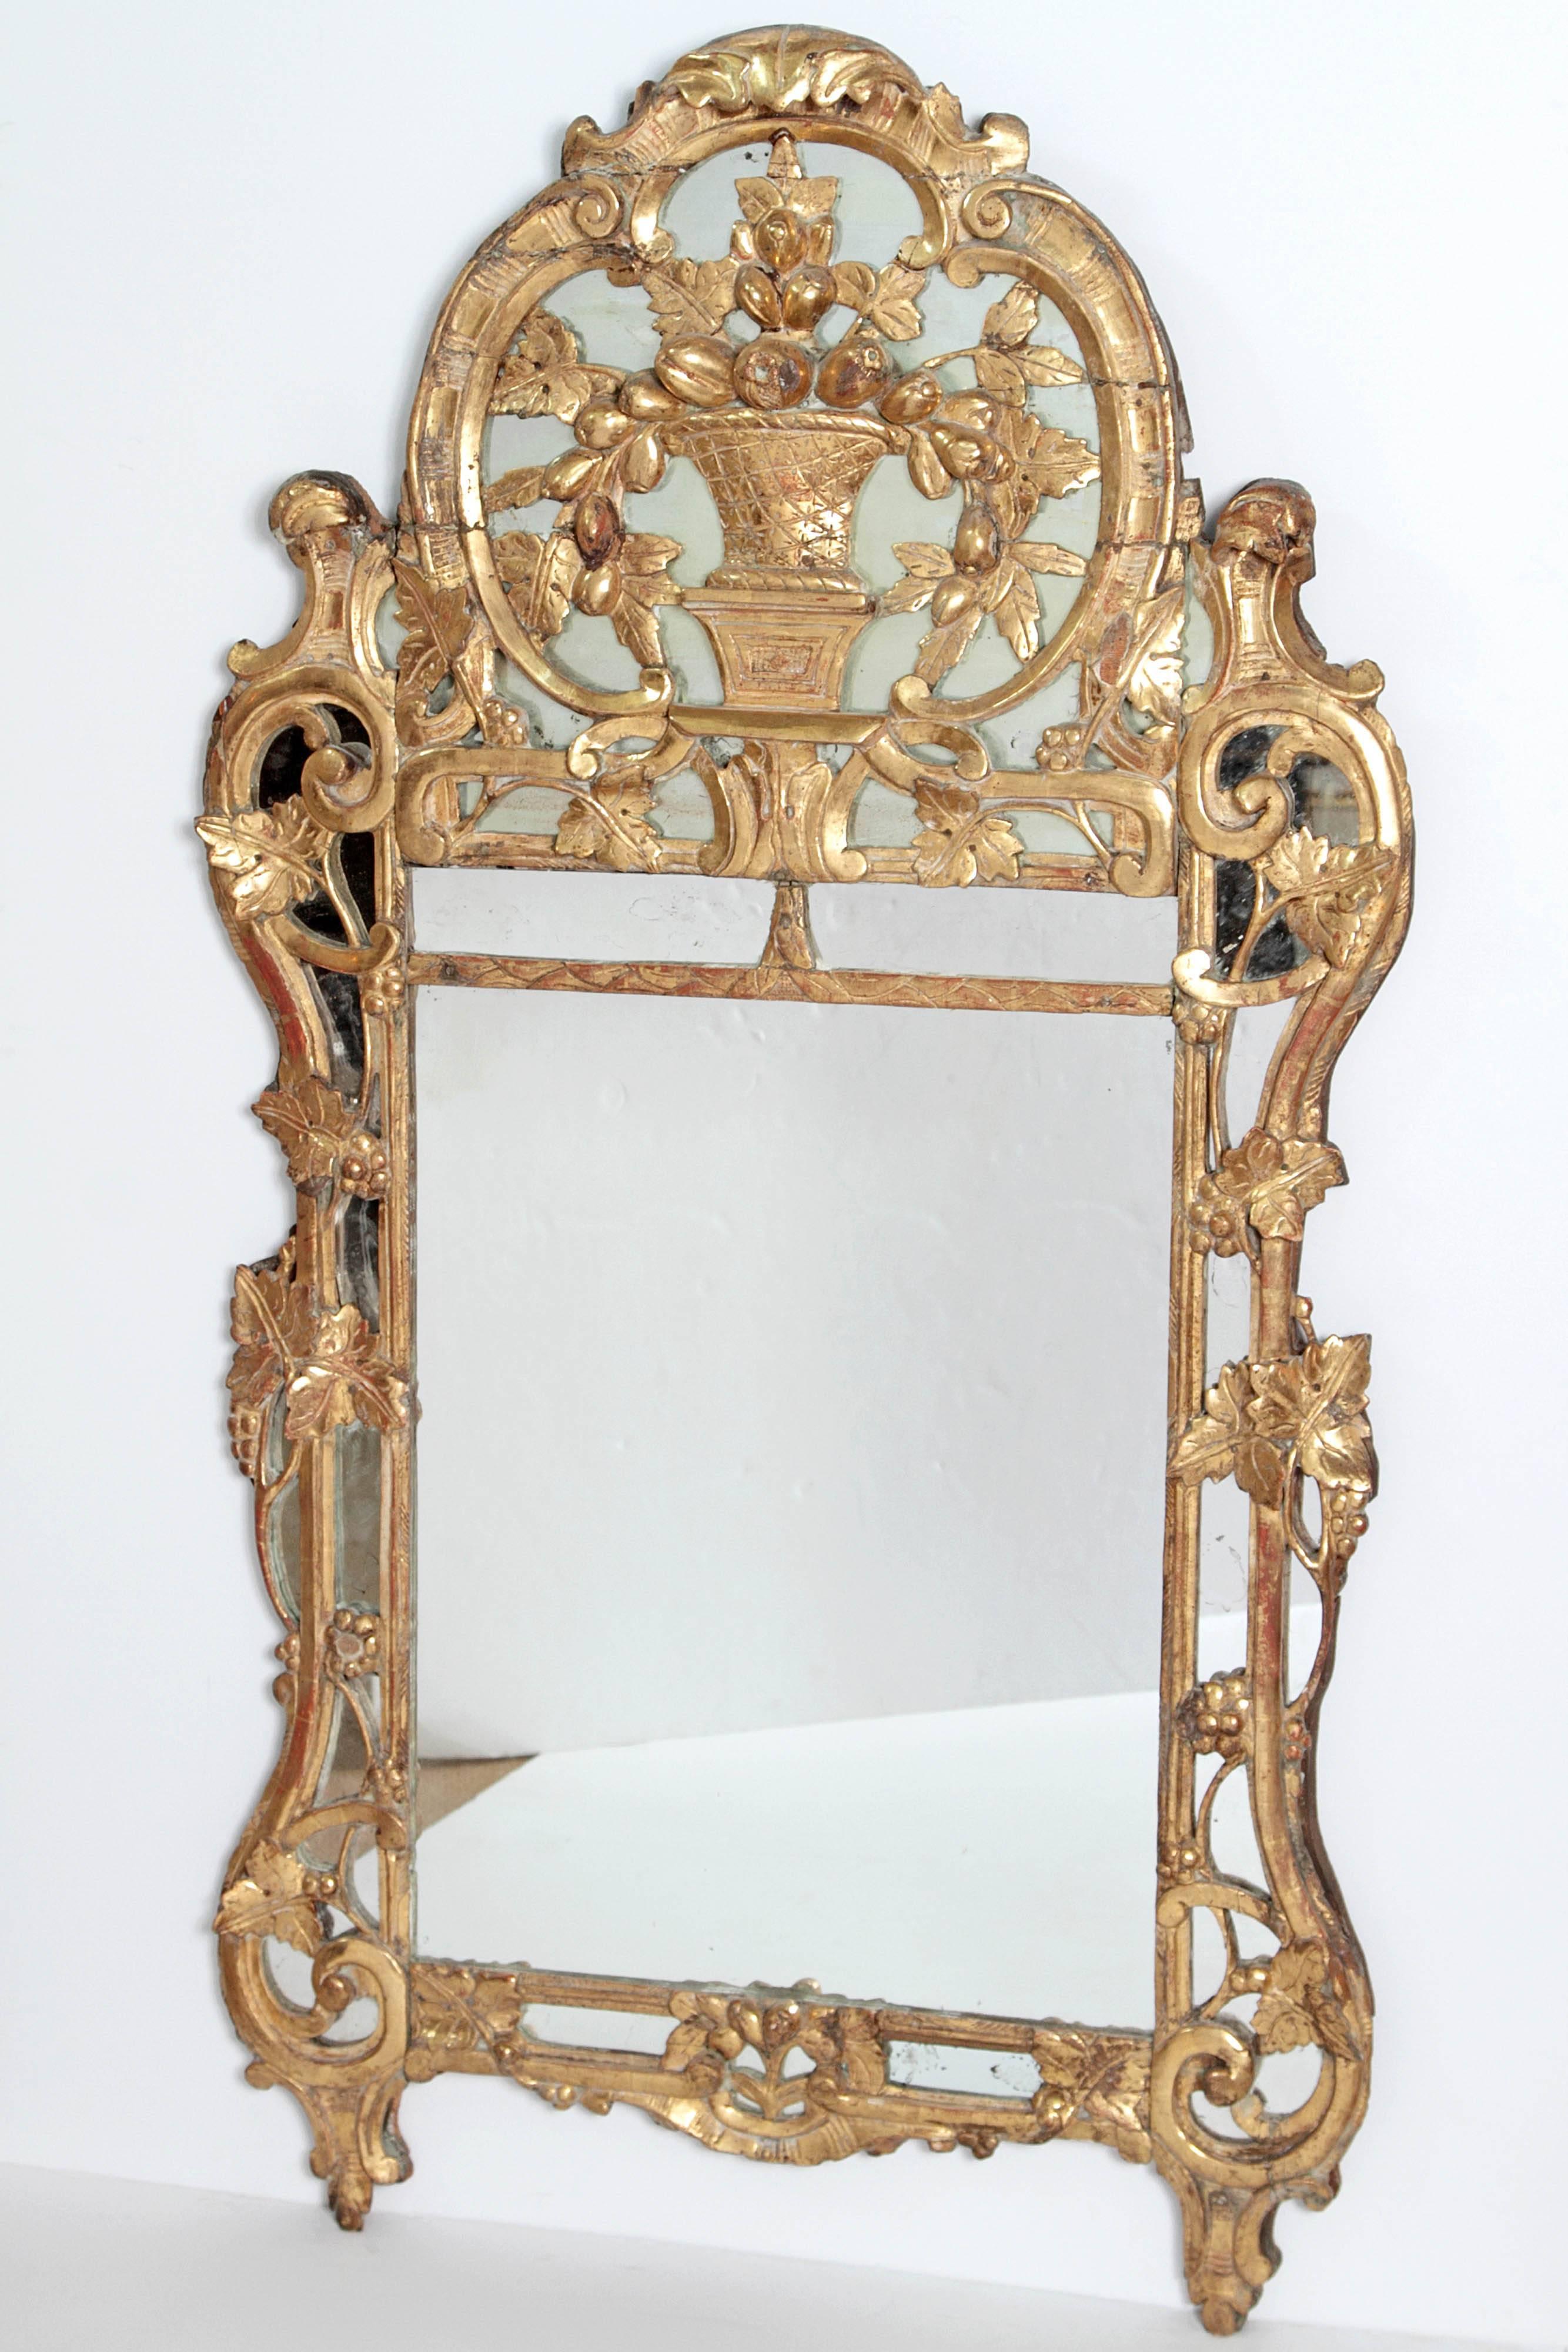 18th century Louis XV Provincial mirror in C-scroll carved wooden frames, with vine leaves, pierced and gilded, decorated with a stylized vase filled with foliage and seasonal fruit. The mirror is decorated with rocaille scrolls, vines, grapes and